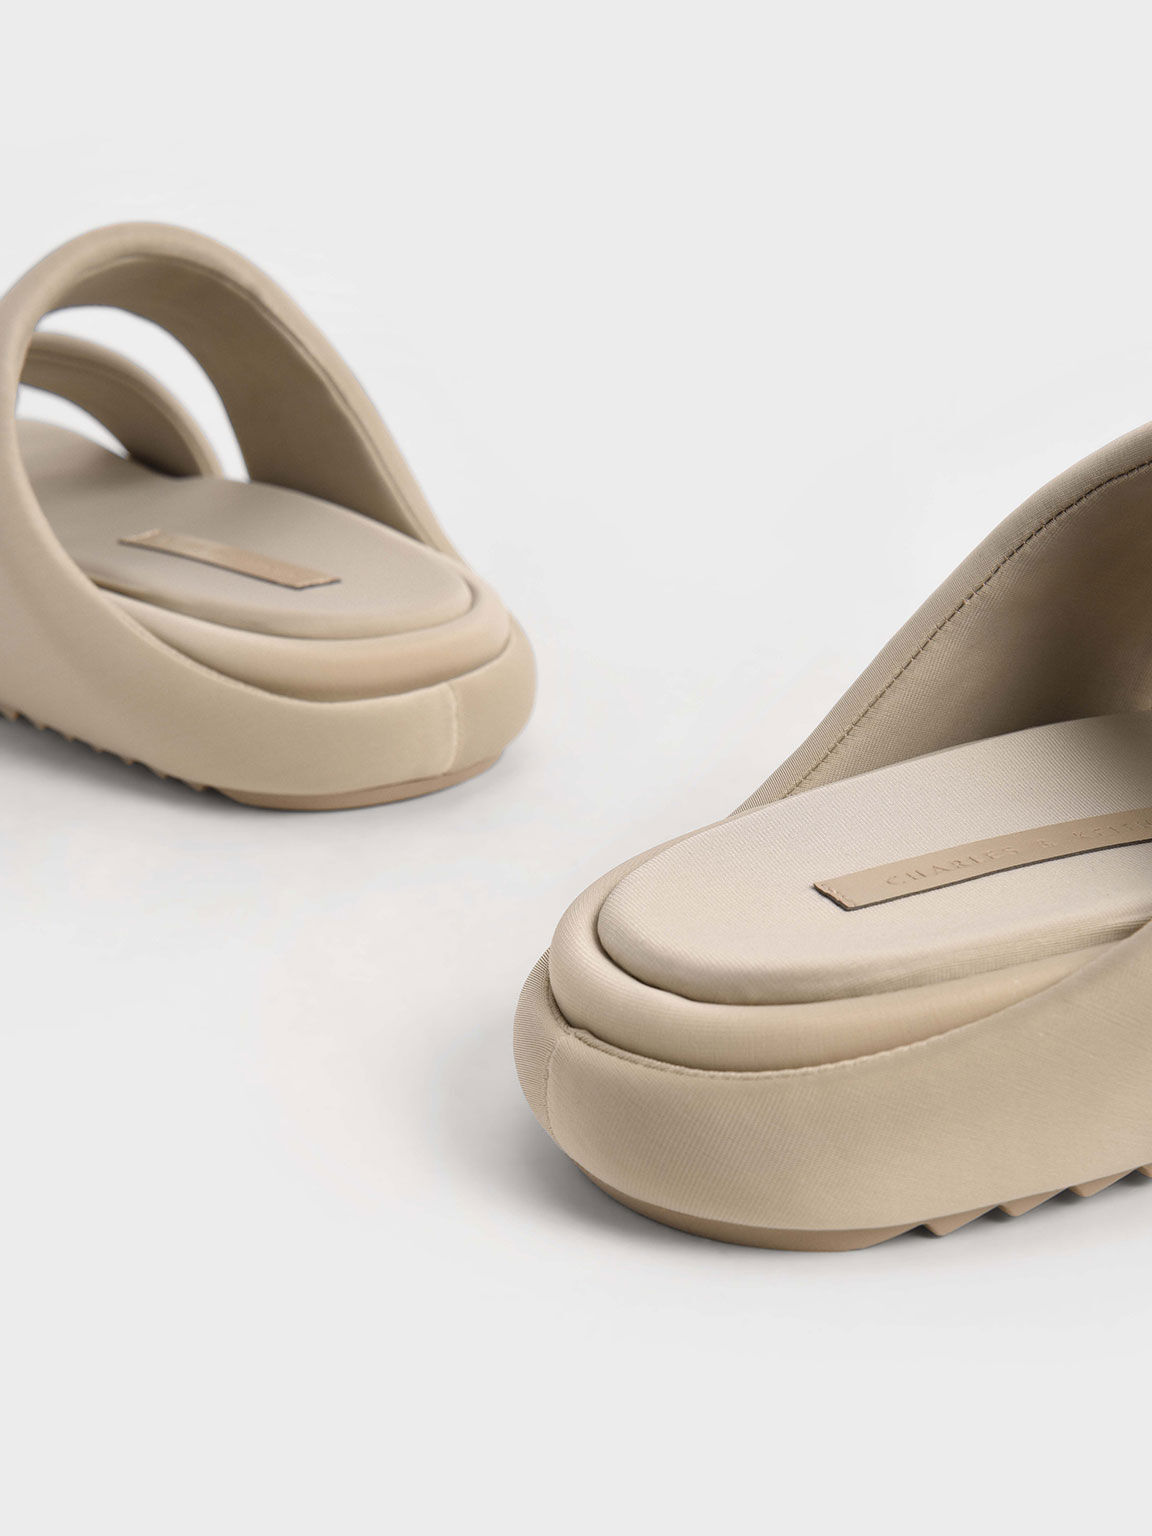 Recycled Polyester Padded Slide Sandals, Sand, hi-res